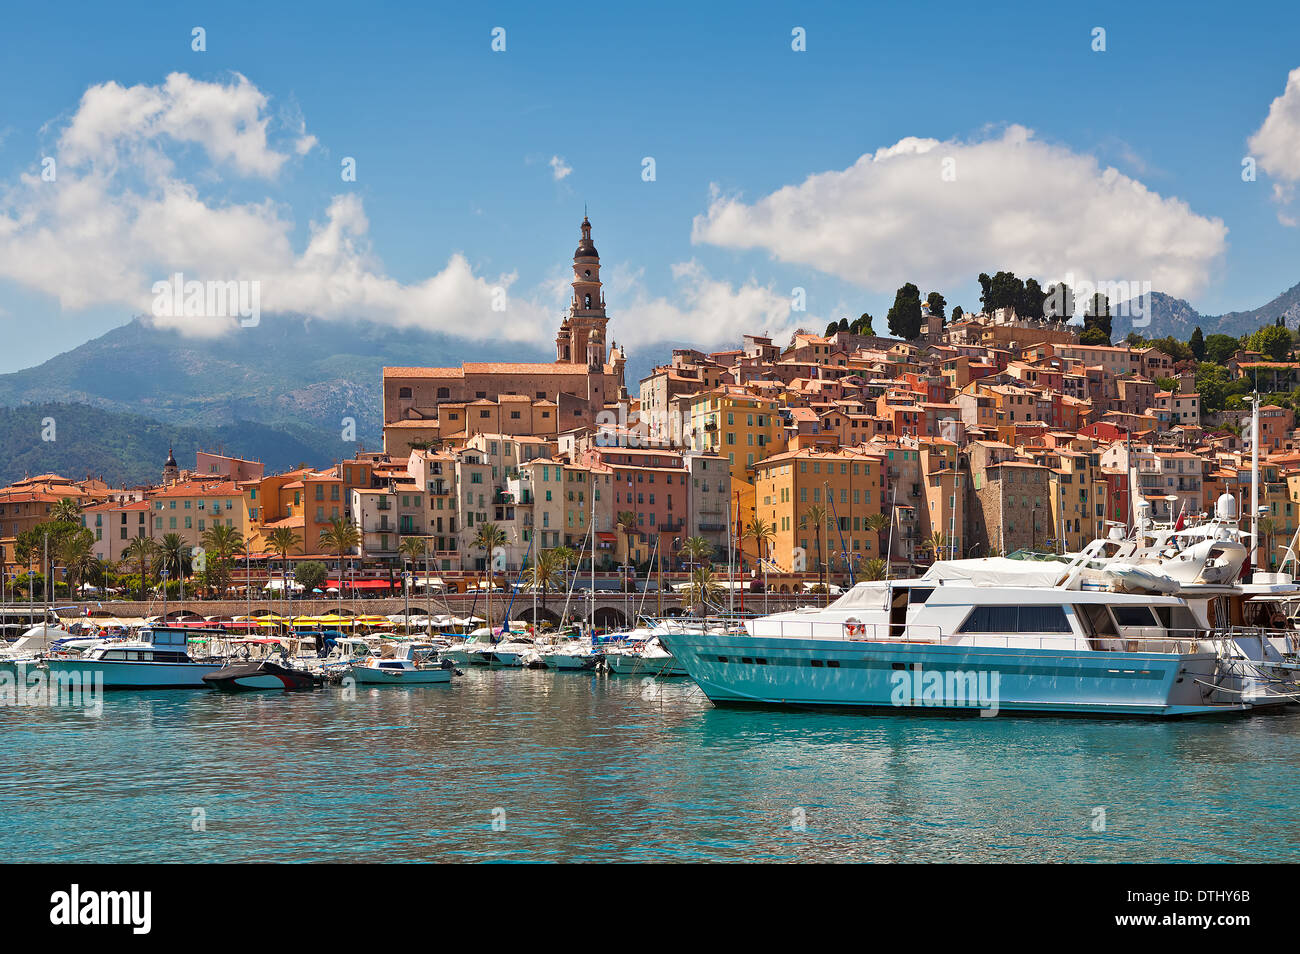 Colorful houses of old medieval town and small harbor with yachts and boats in Menton, France. Stock Photo